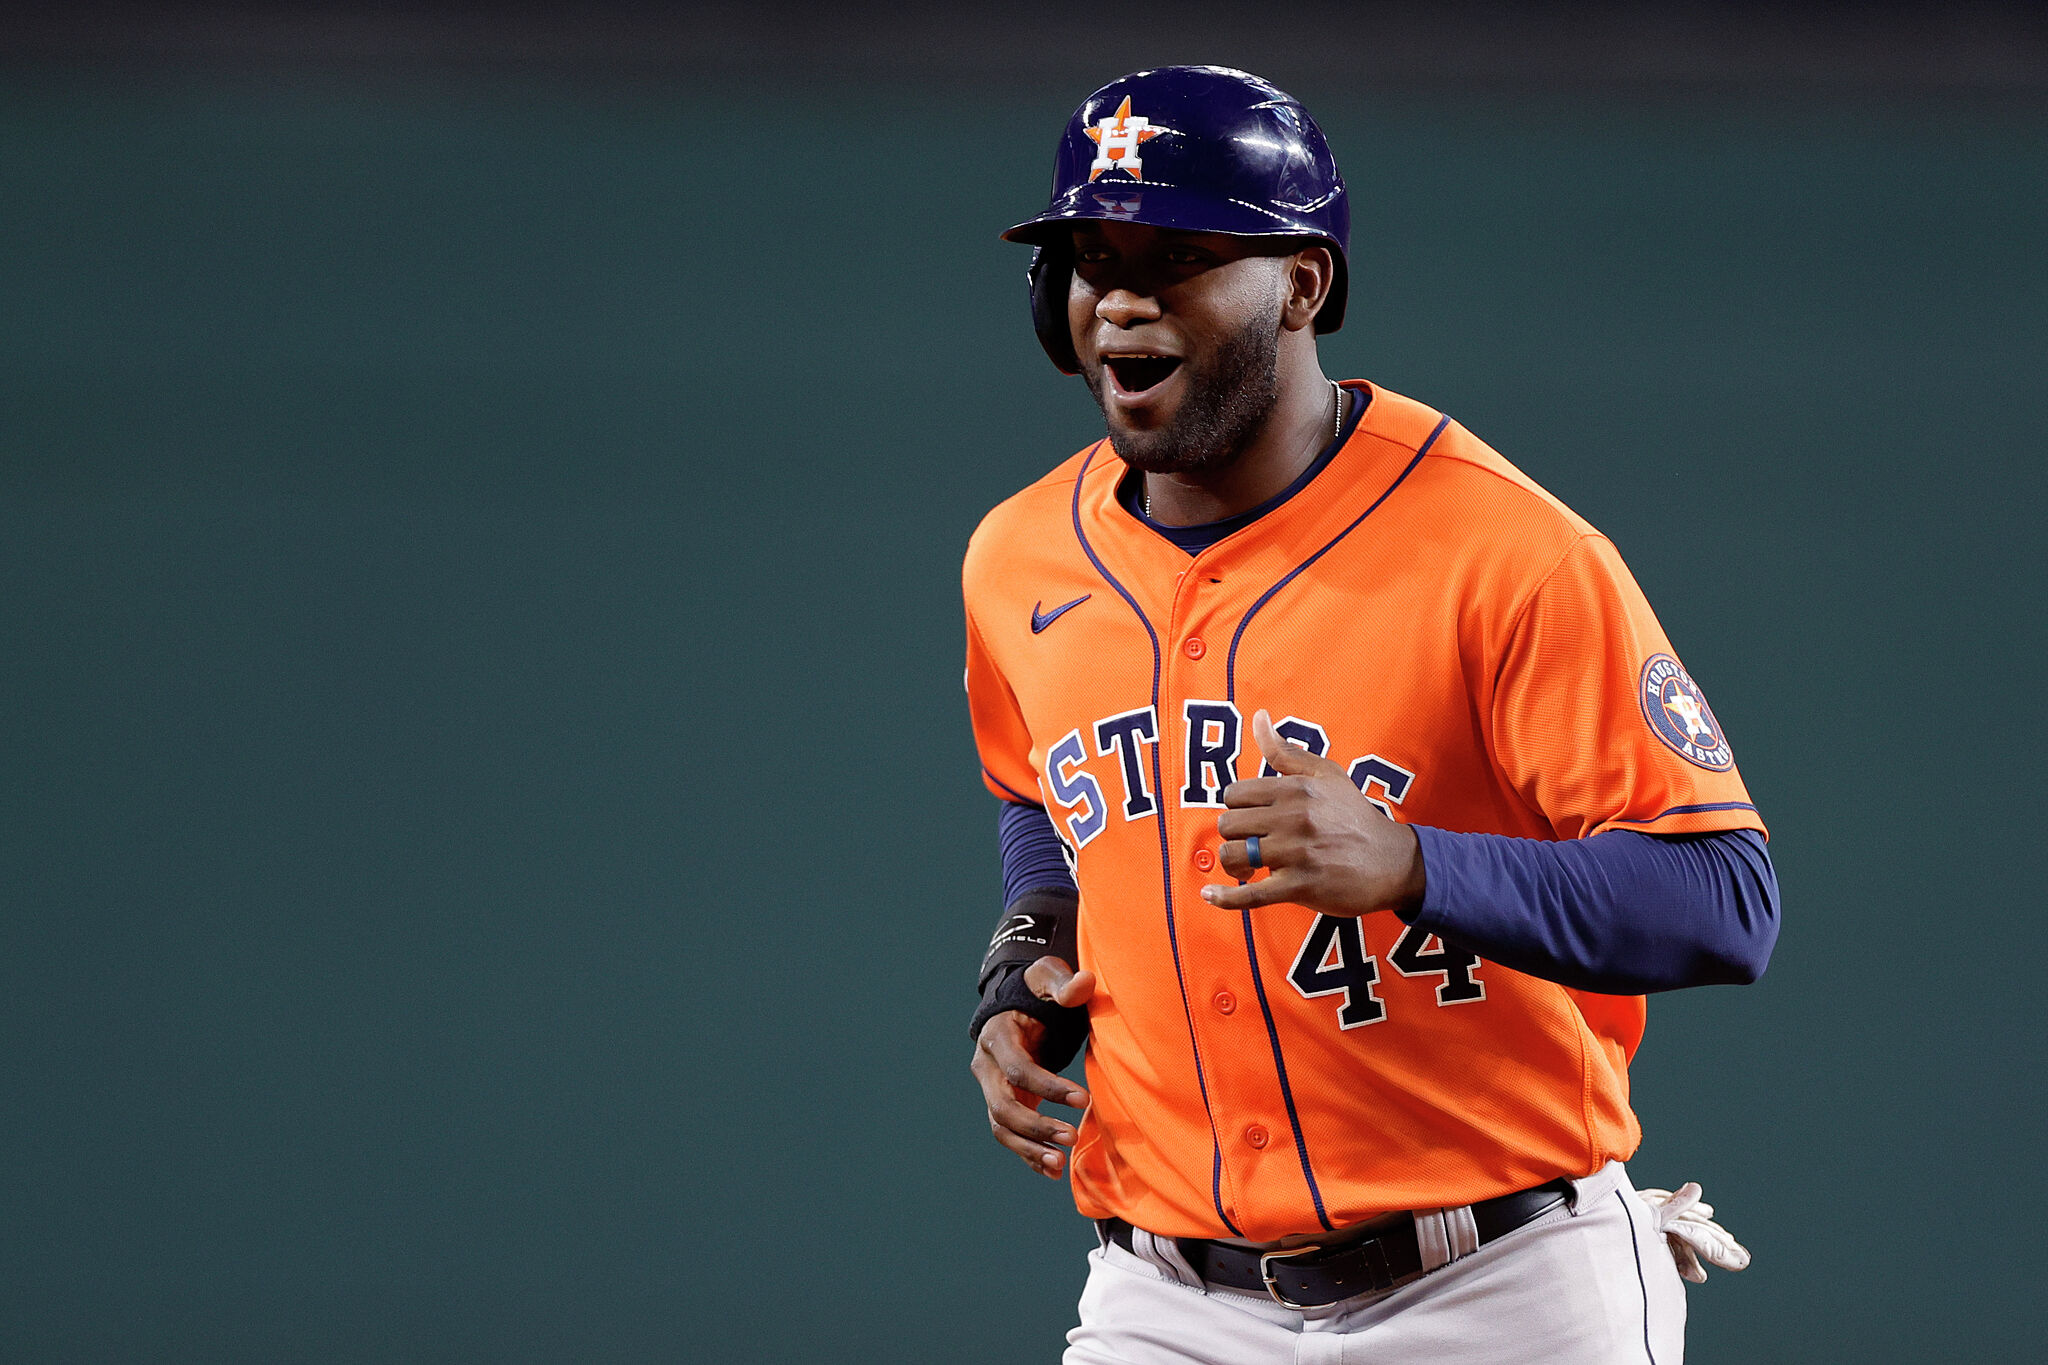 ALCS between Astros and Rangers prompts Lina Hidalgo, Sylvester Turner to  make bets with Dallas-area counterparts – Houston Public Media